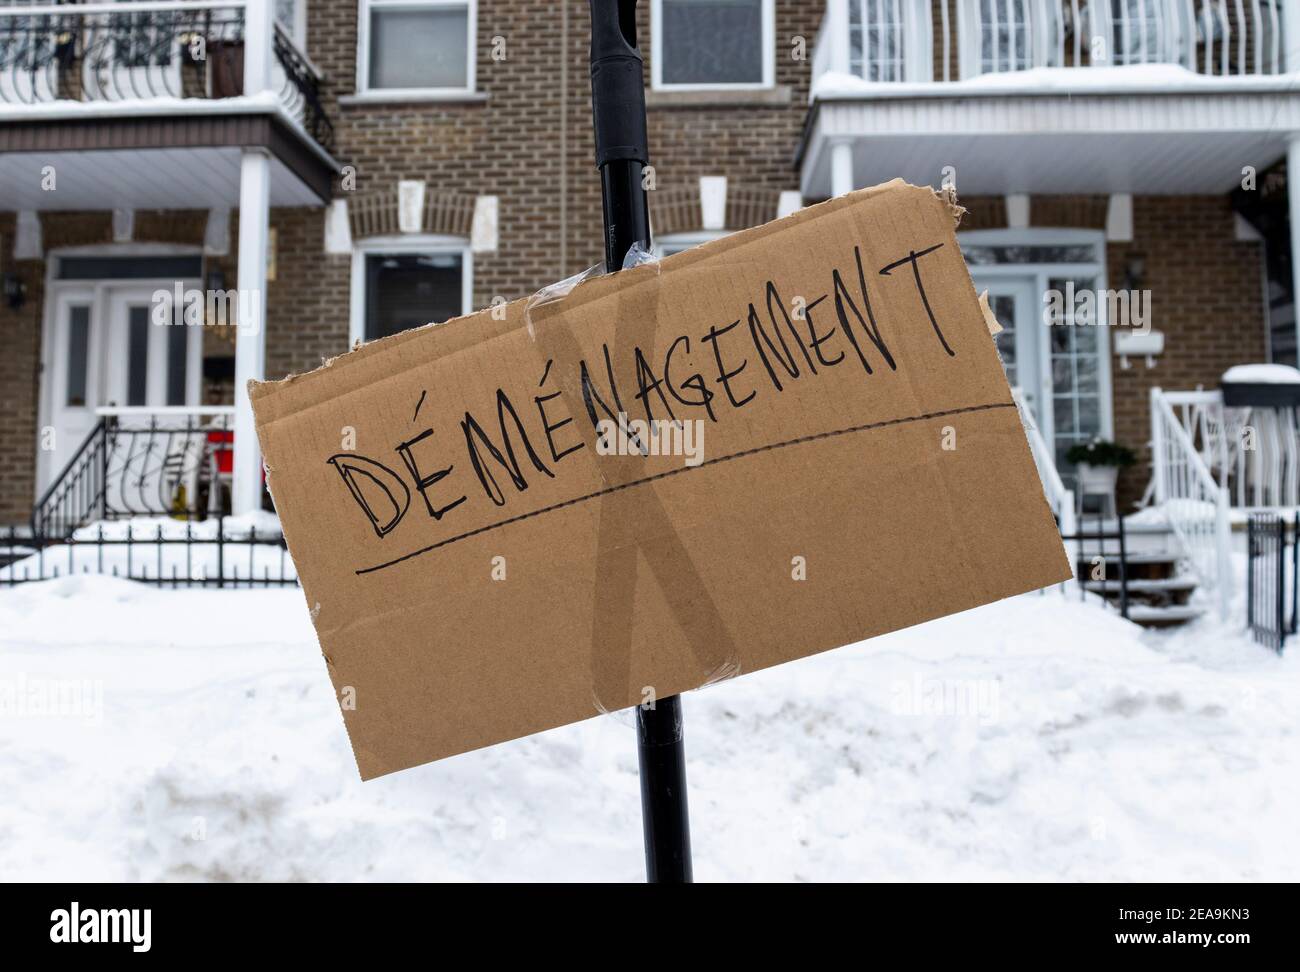 February 6, 2021 - Montreal, Qc, Canada: Moving Day Sign in front of apartments to secure parking space on a narrow street in winter Stock Photo